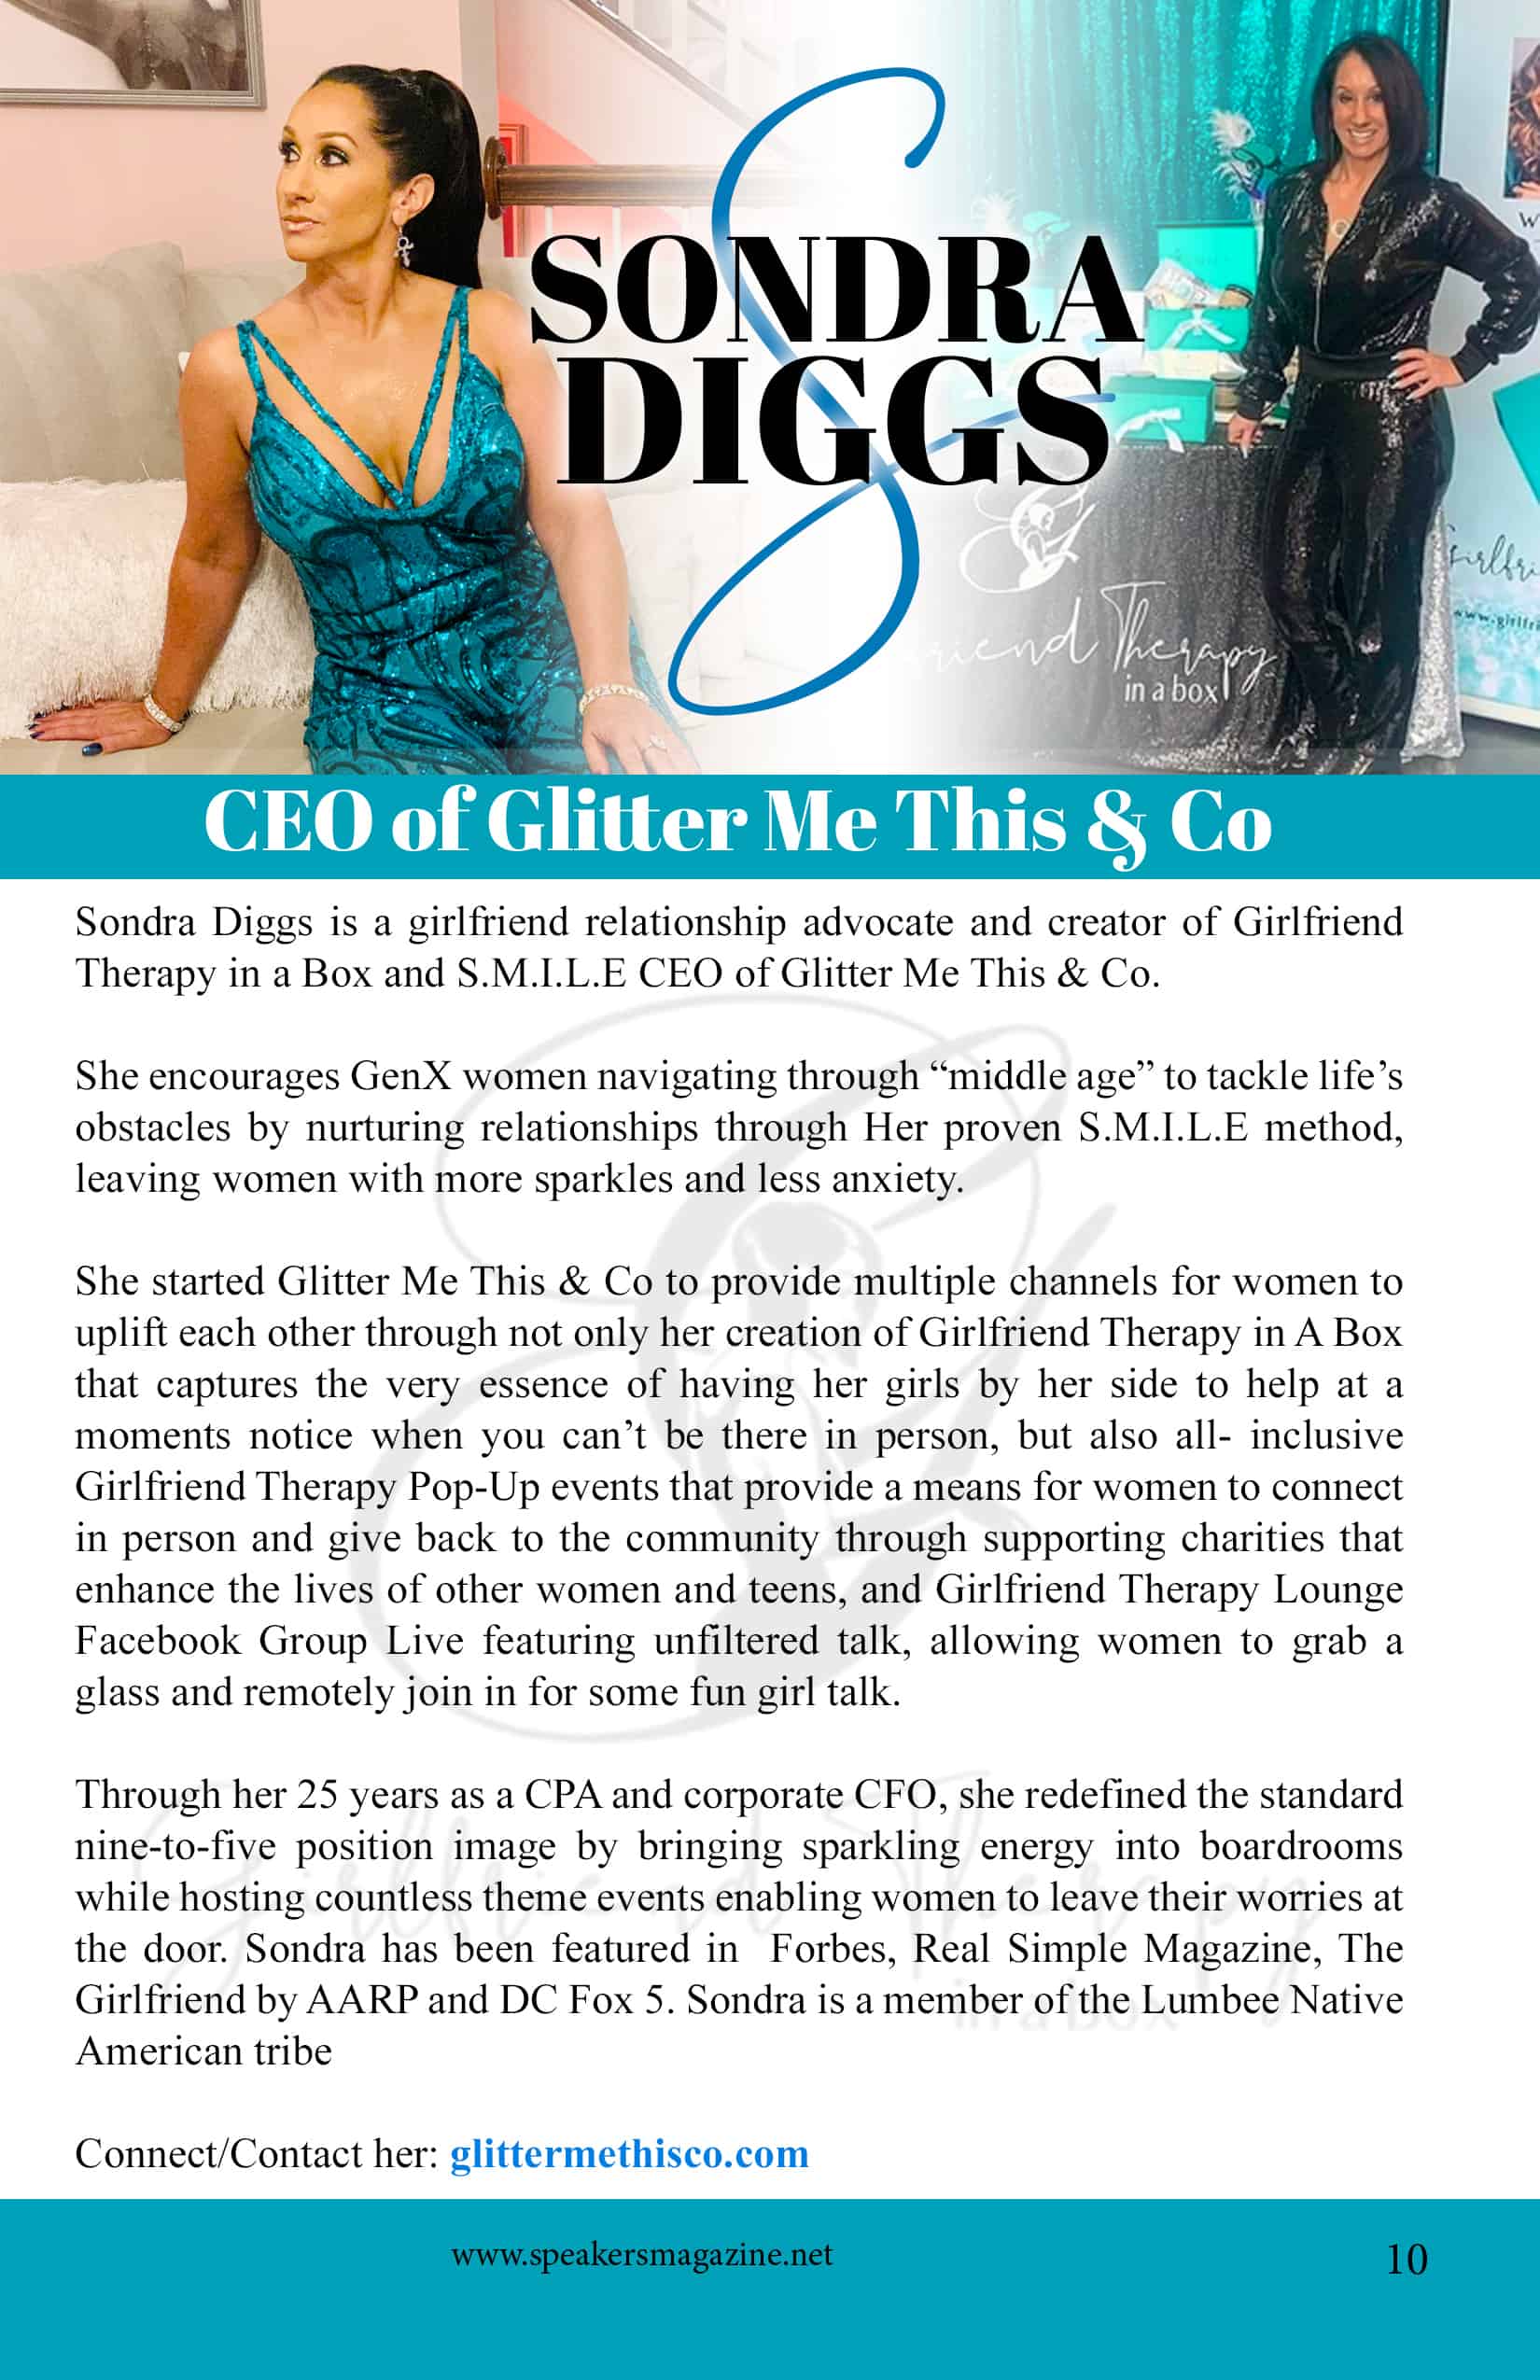 Sondra Diggs: CEO of Glitter Me This & Co